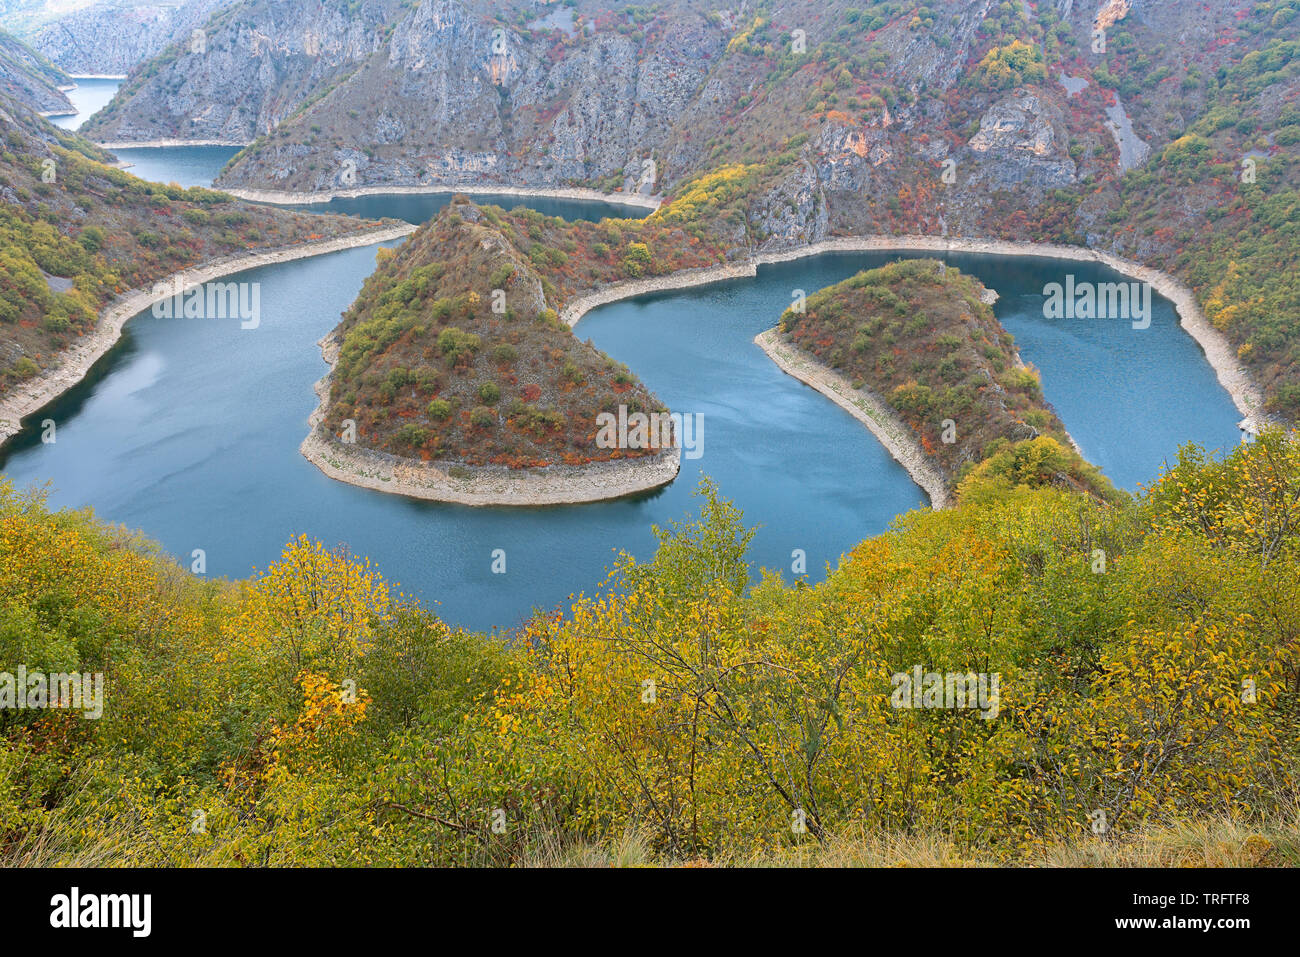 Meanders of Uvac river, Serbia Stock Photo